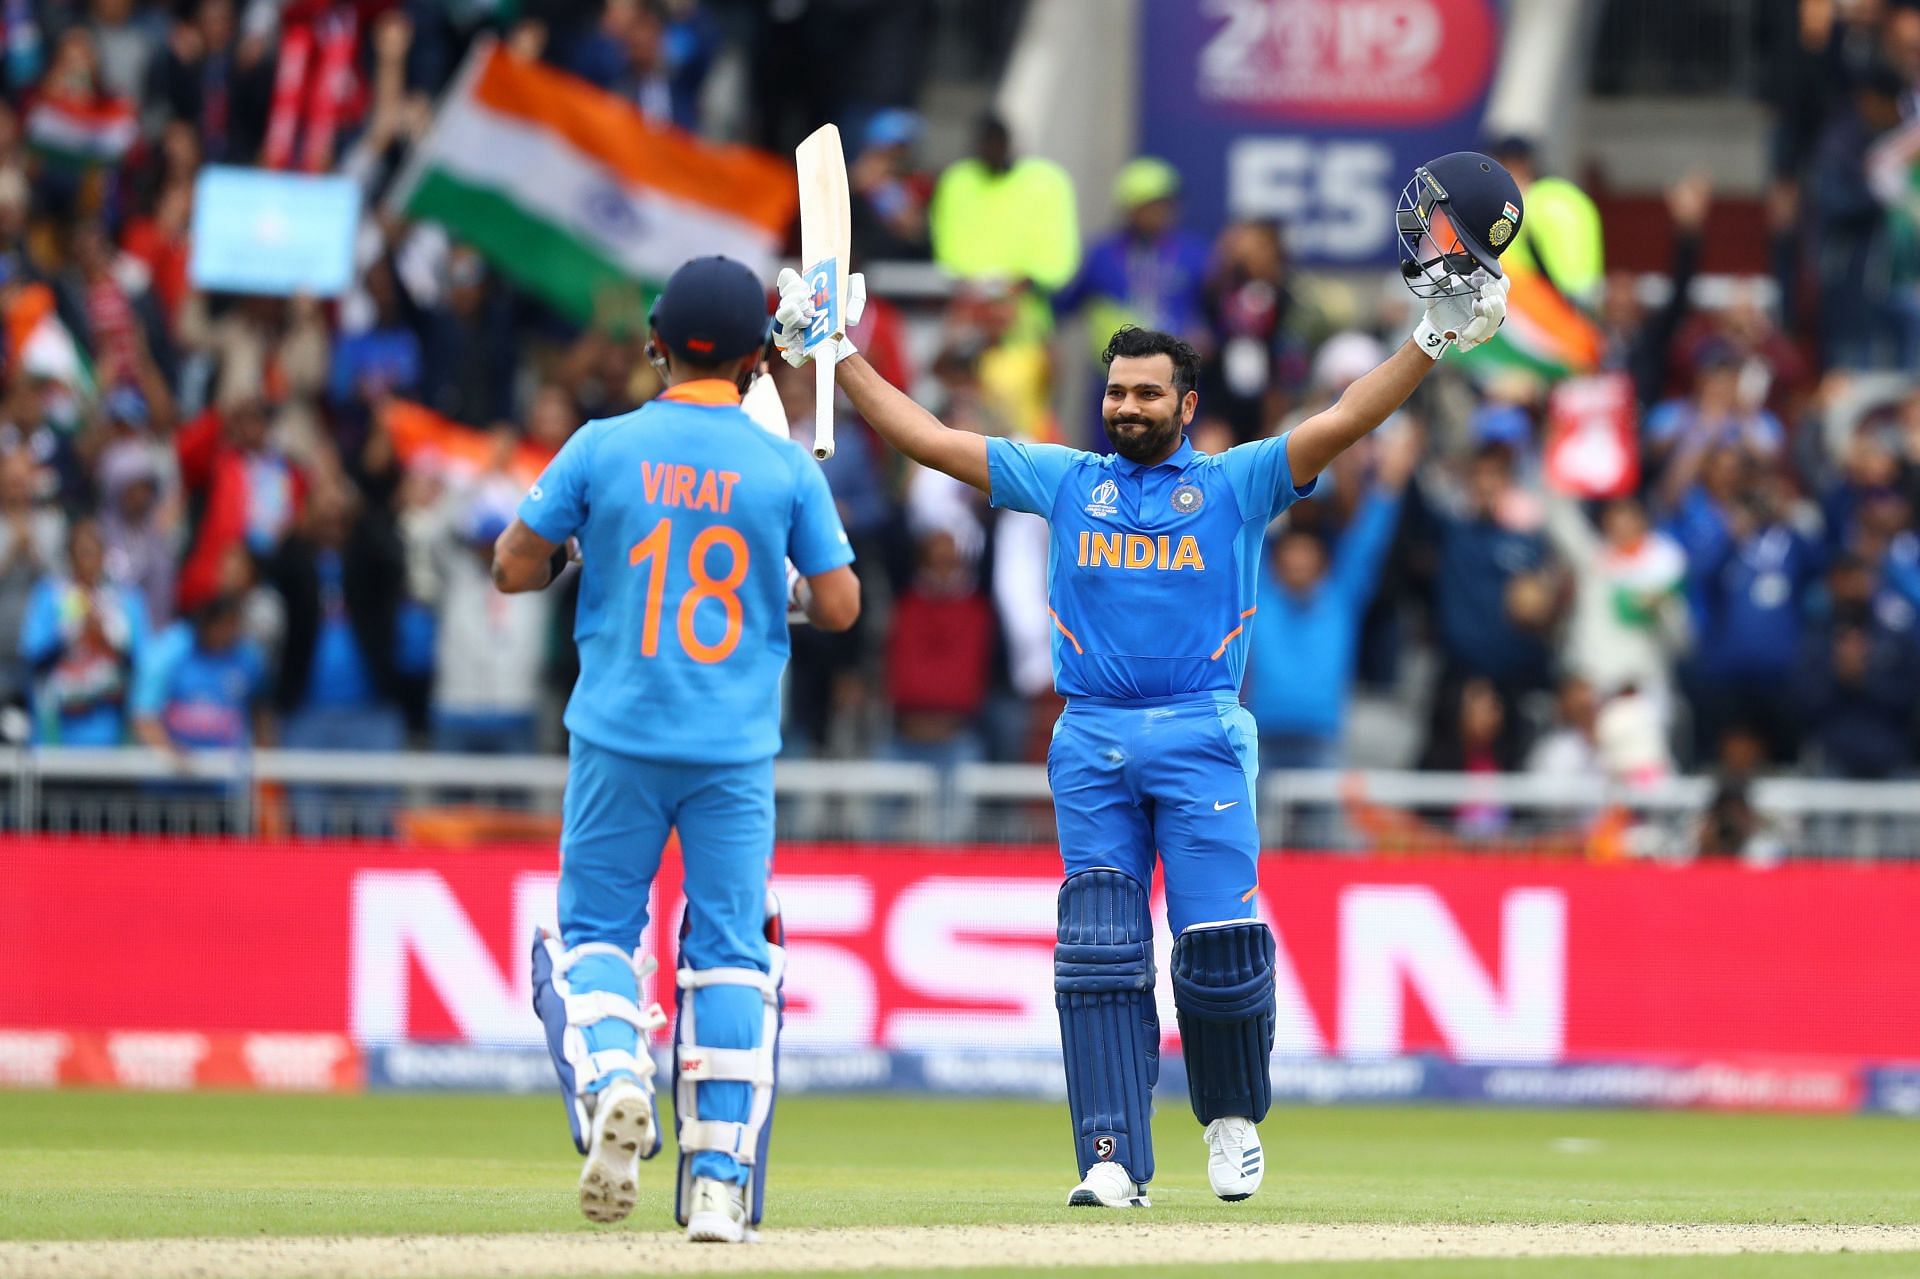 Rohit Sharma scored 648 runs at an average of 81.00 in the 2019 World Cup.